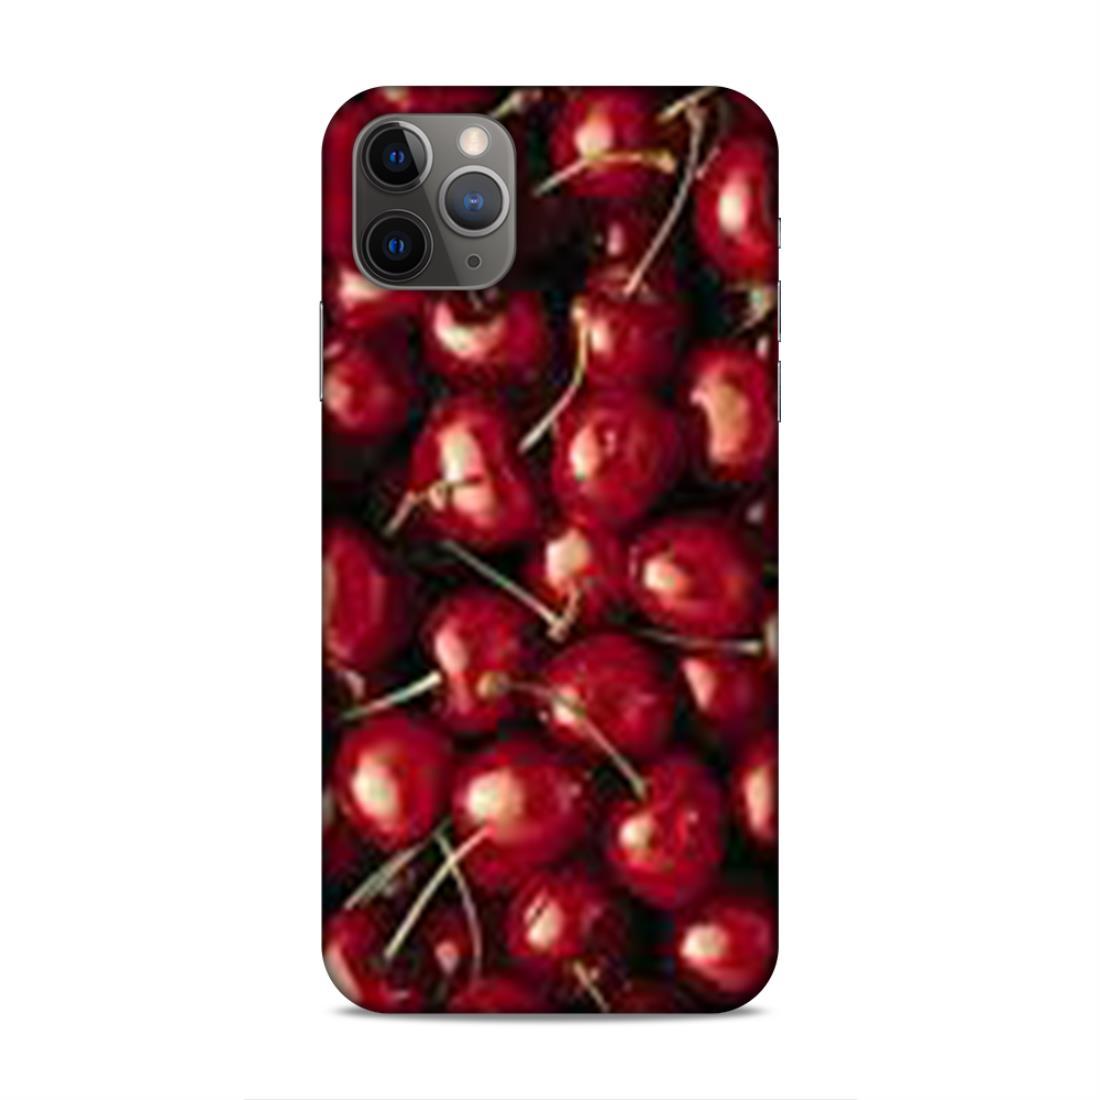 Red Cherry Love iPhone 11 Pro Max Mobile Cover Case